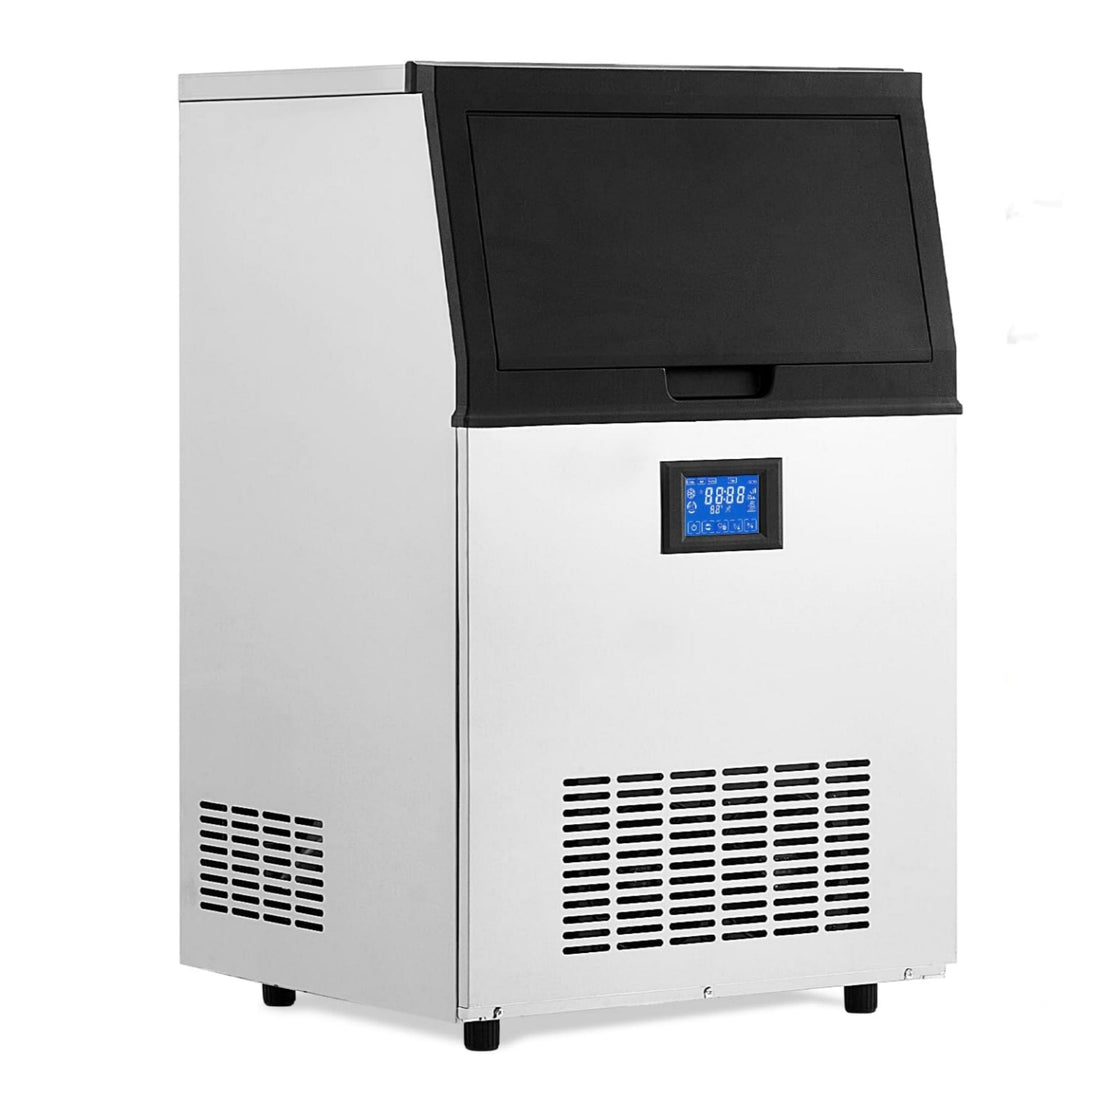 GARVEE 90Lbs/24H, Ice Maker, 30Lbs Storage, Self-Cleaning, Stainless, Freestanding/Under Counter, Perfect for Restaurant/Bar/Cafe/Shop/Home/Office